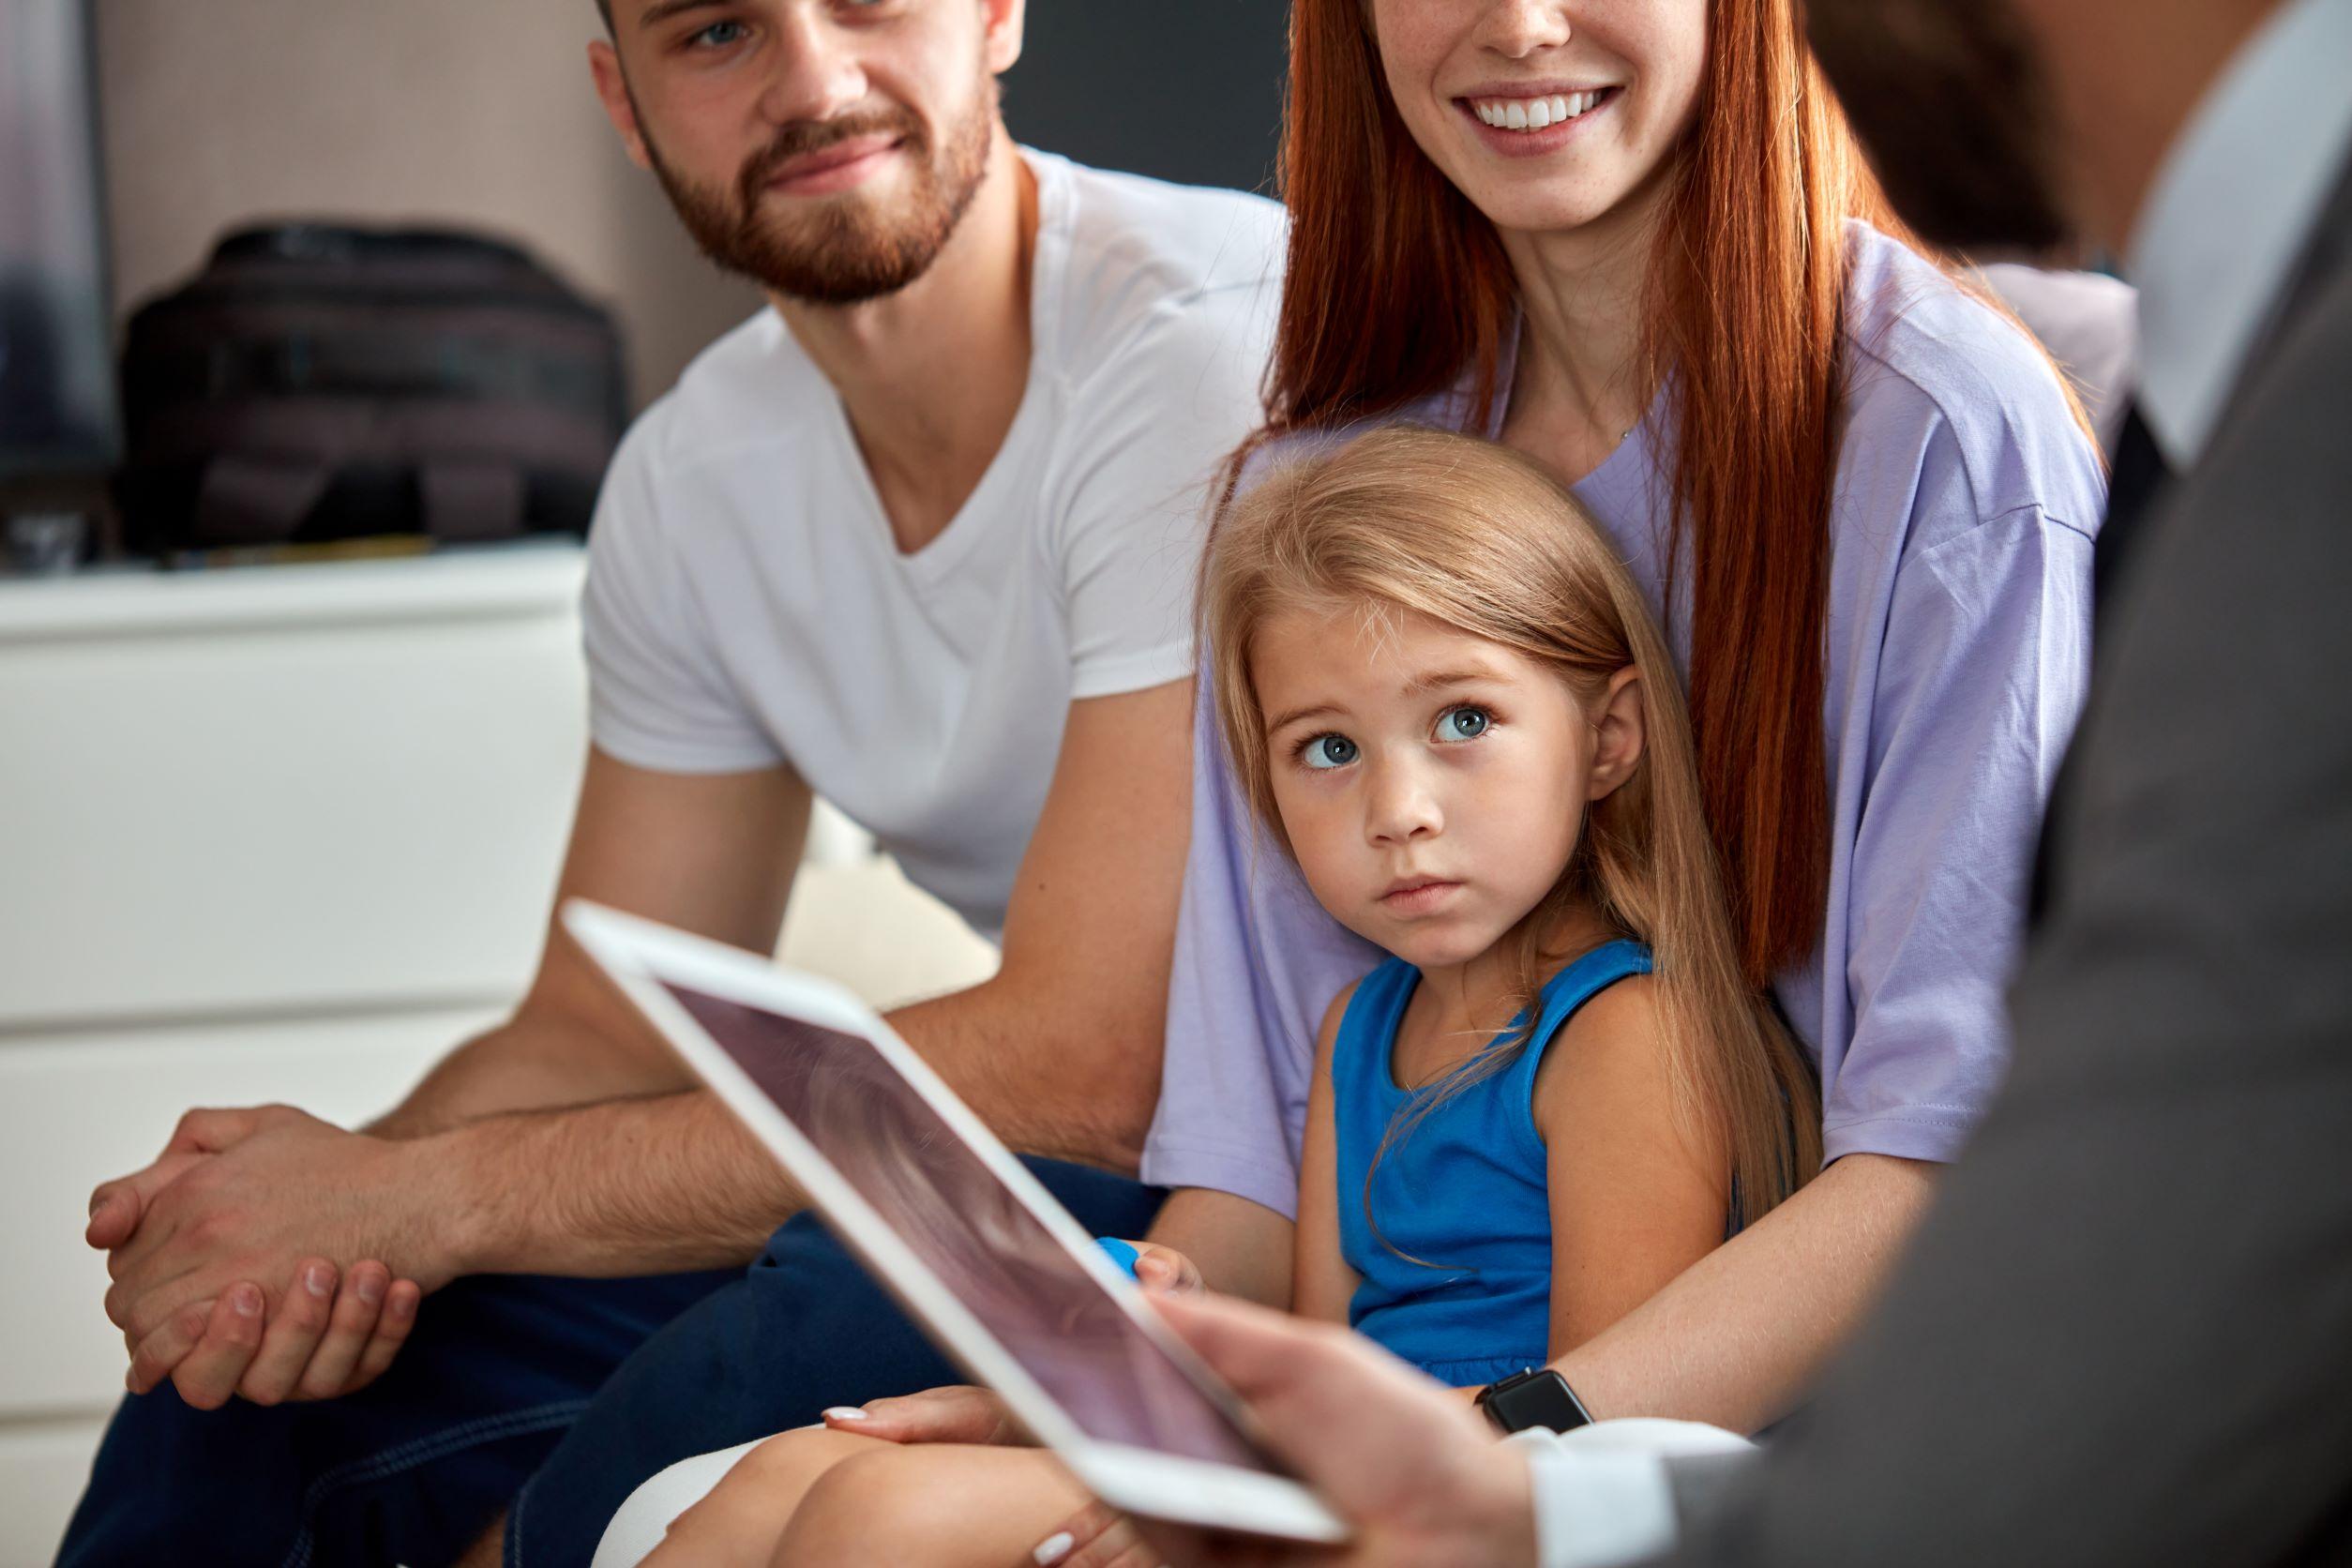 two adults holding young child talking to therapist holding ipad